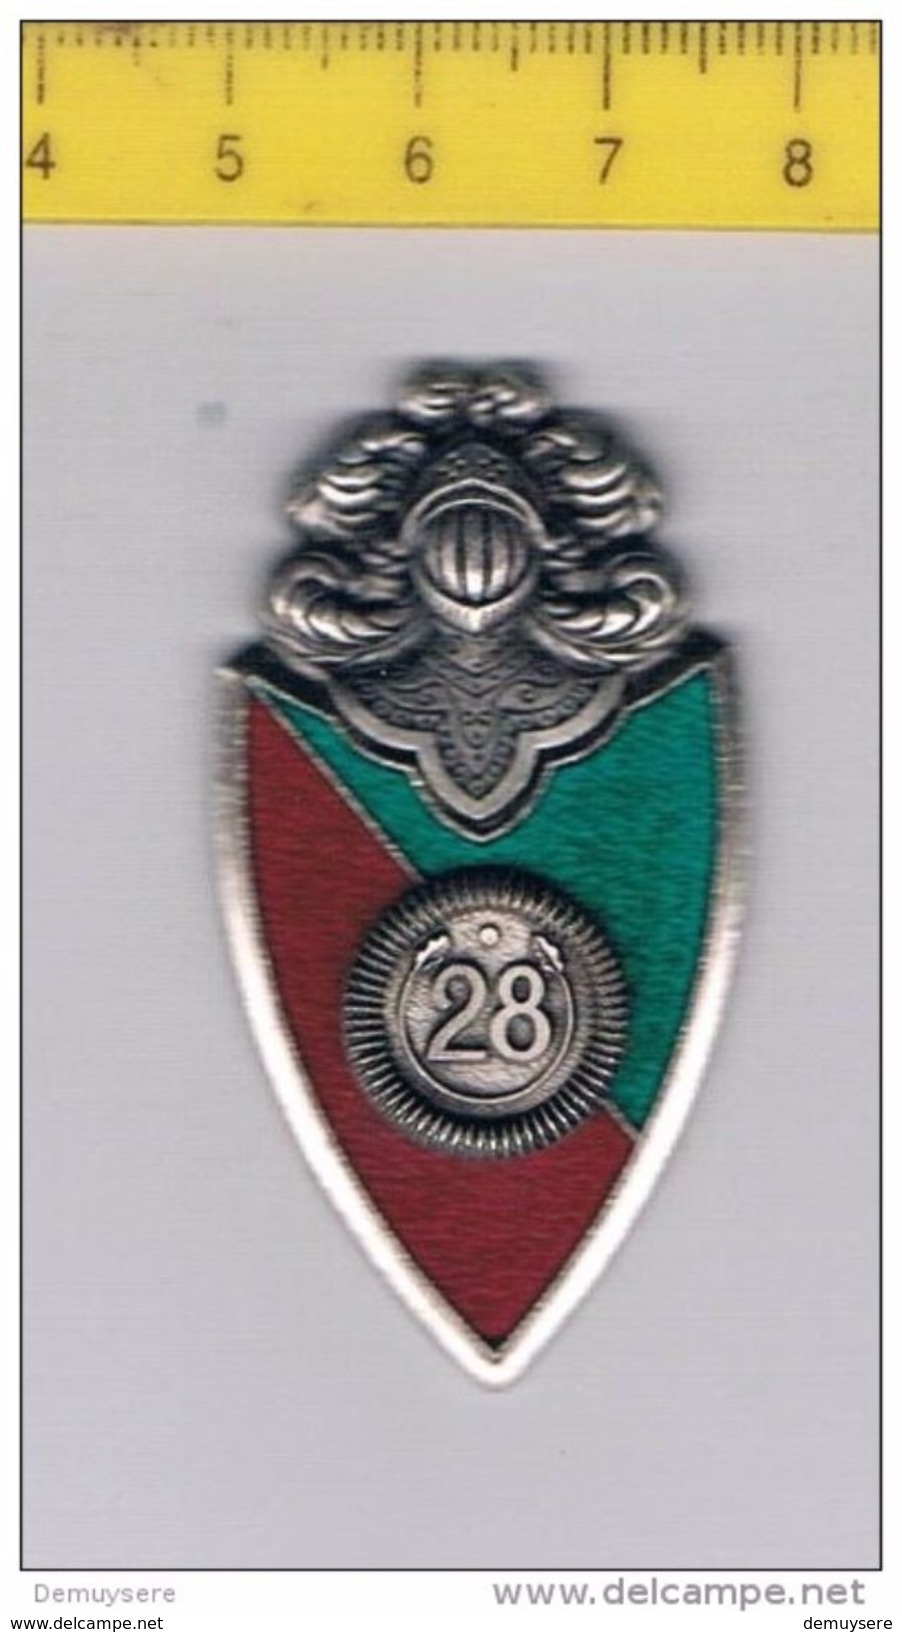 Medaille 266 - 28 - Esercito